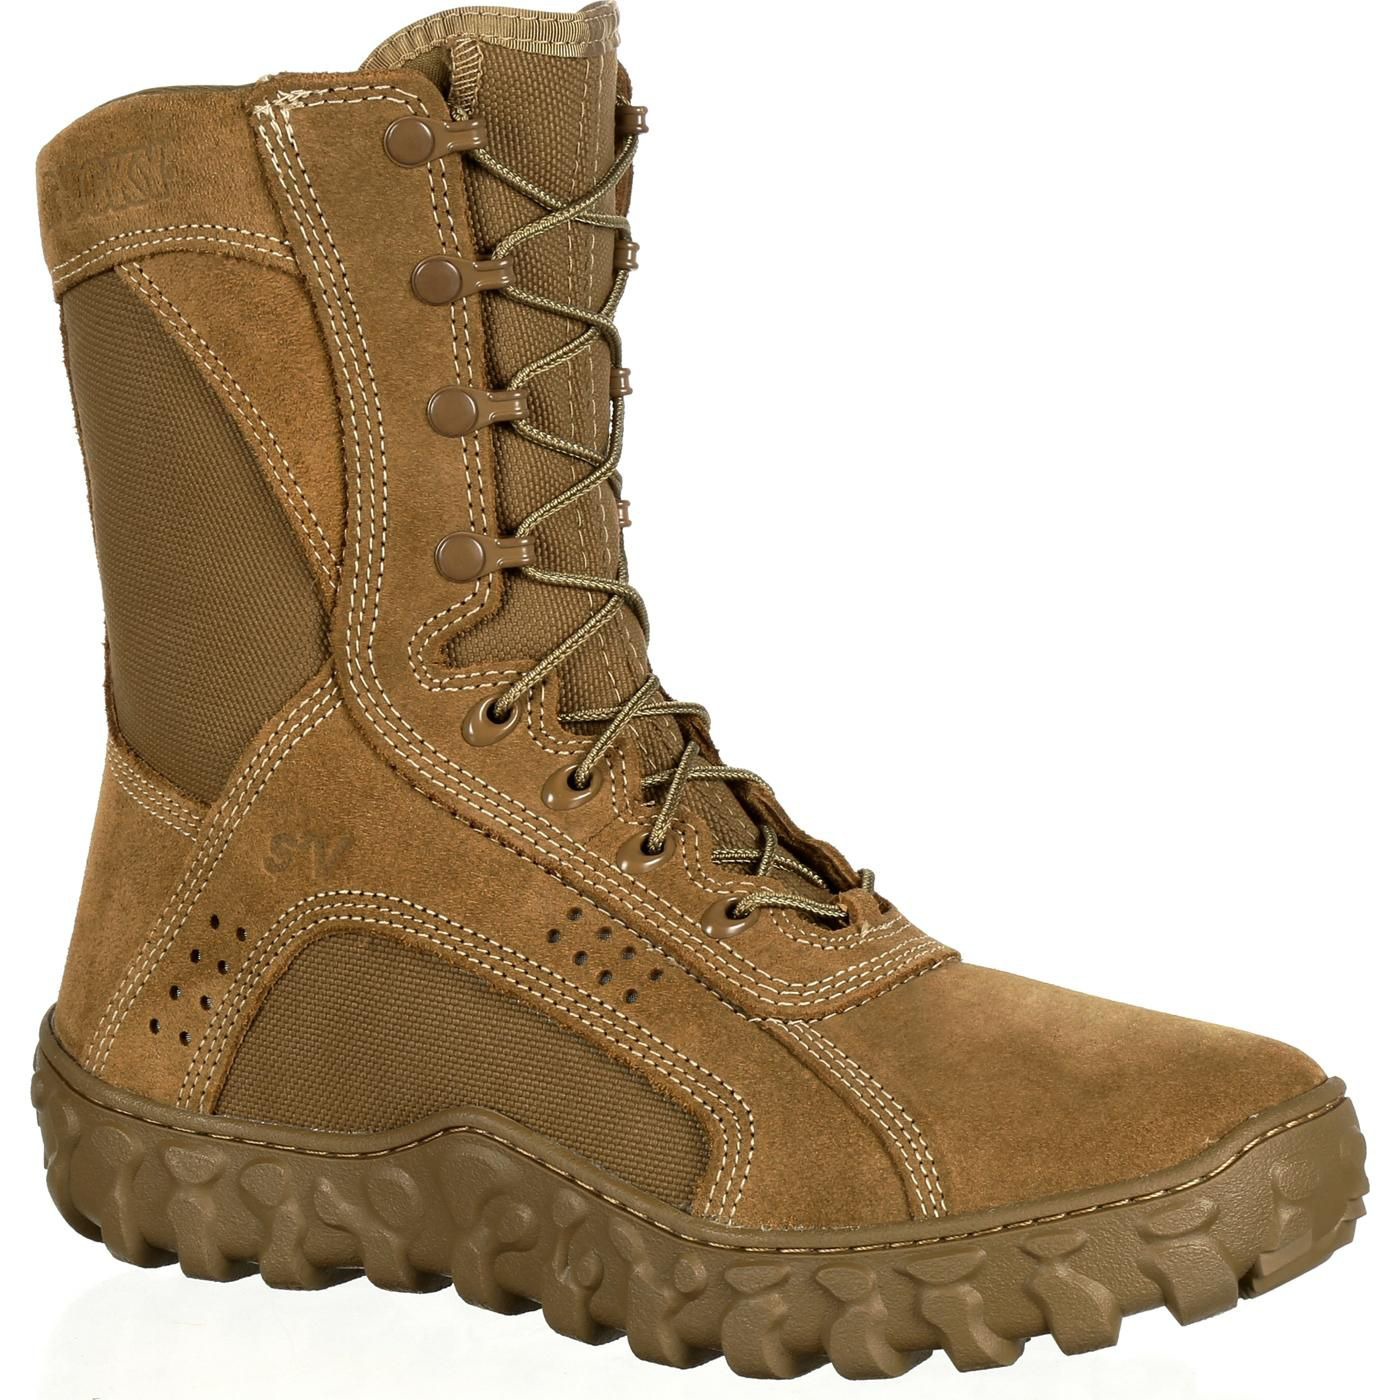 Rocky S2V Tactical Military Boots for Men - Coyote Brown - 9M